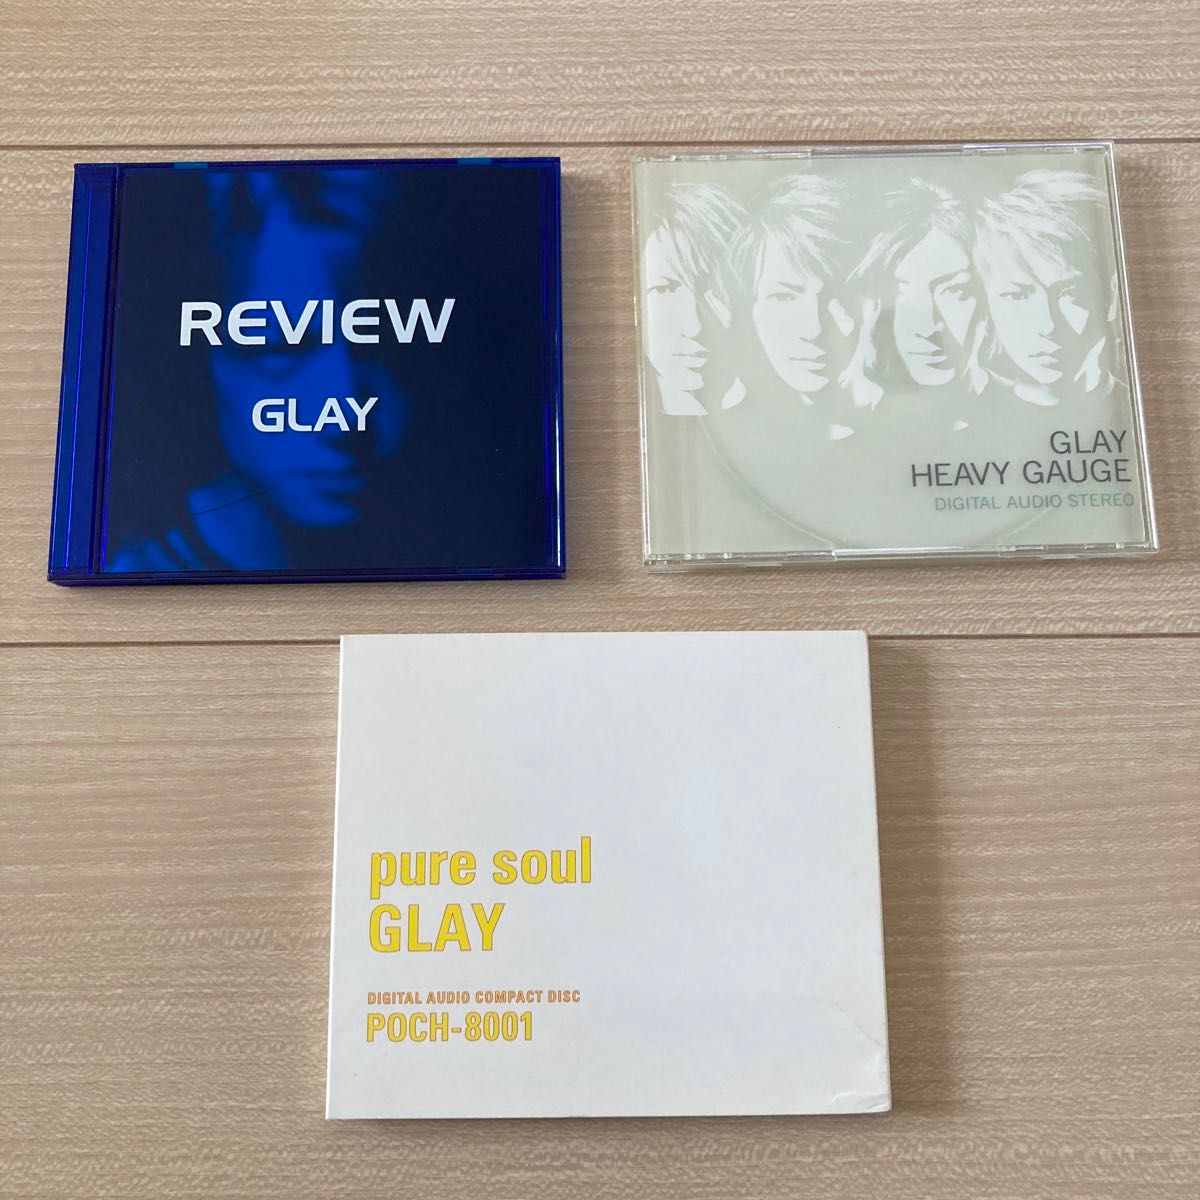 GLAY CD名盤セット　「Review」「heavy gauge」「pure soul」